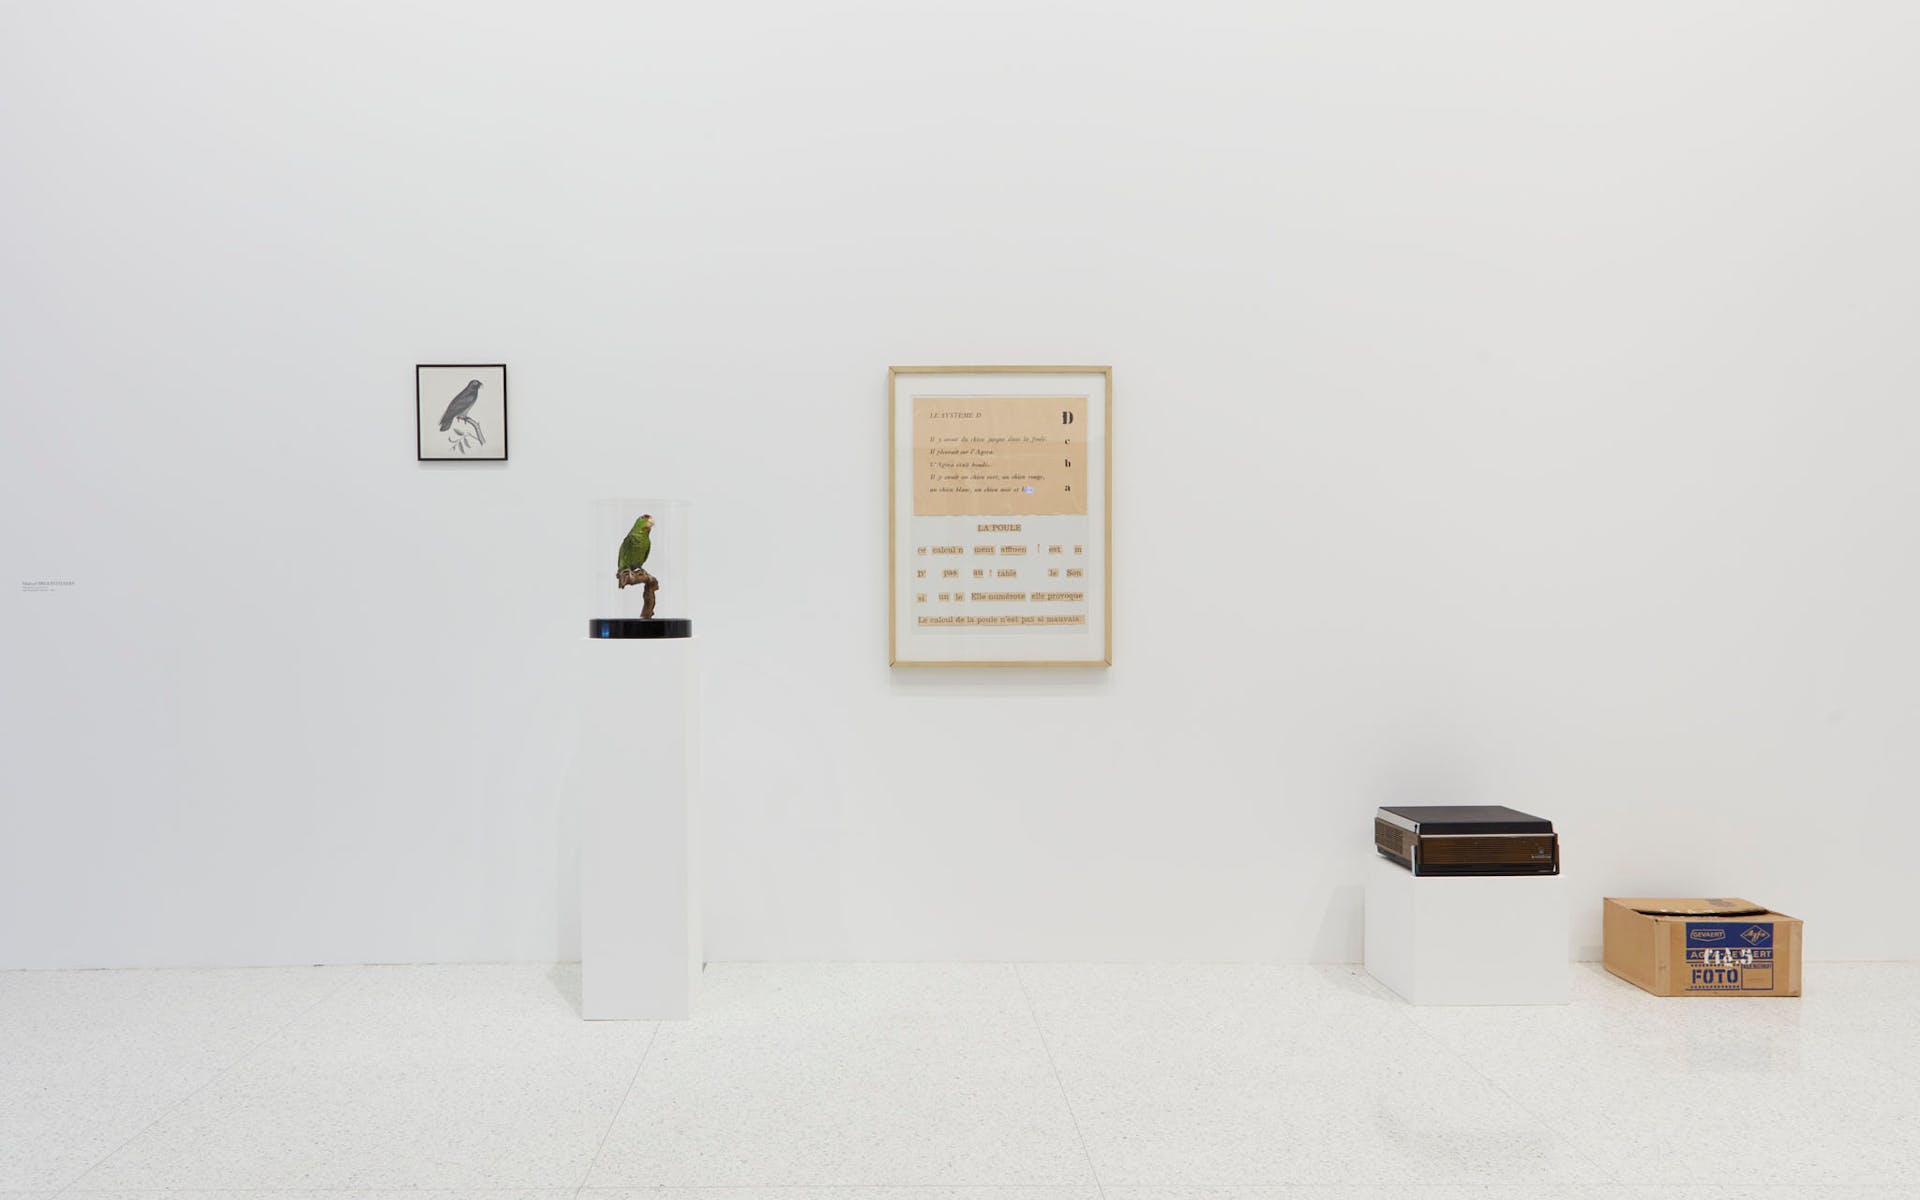 View of the exhibition Question the Wall Itself, 2016; Marcel Broodthaers, Dites partout que je l'ai dit (Say Everywhere I Said So), 1974 (Photo: Gene Pittman, ©Walker Art Center)